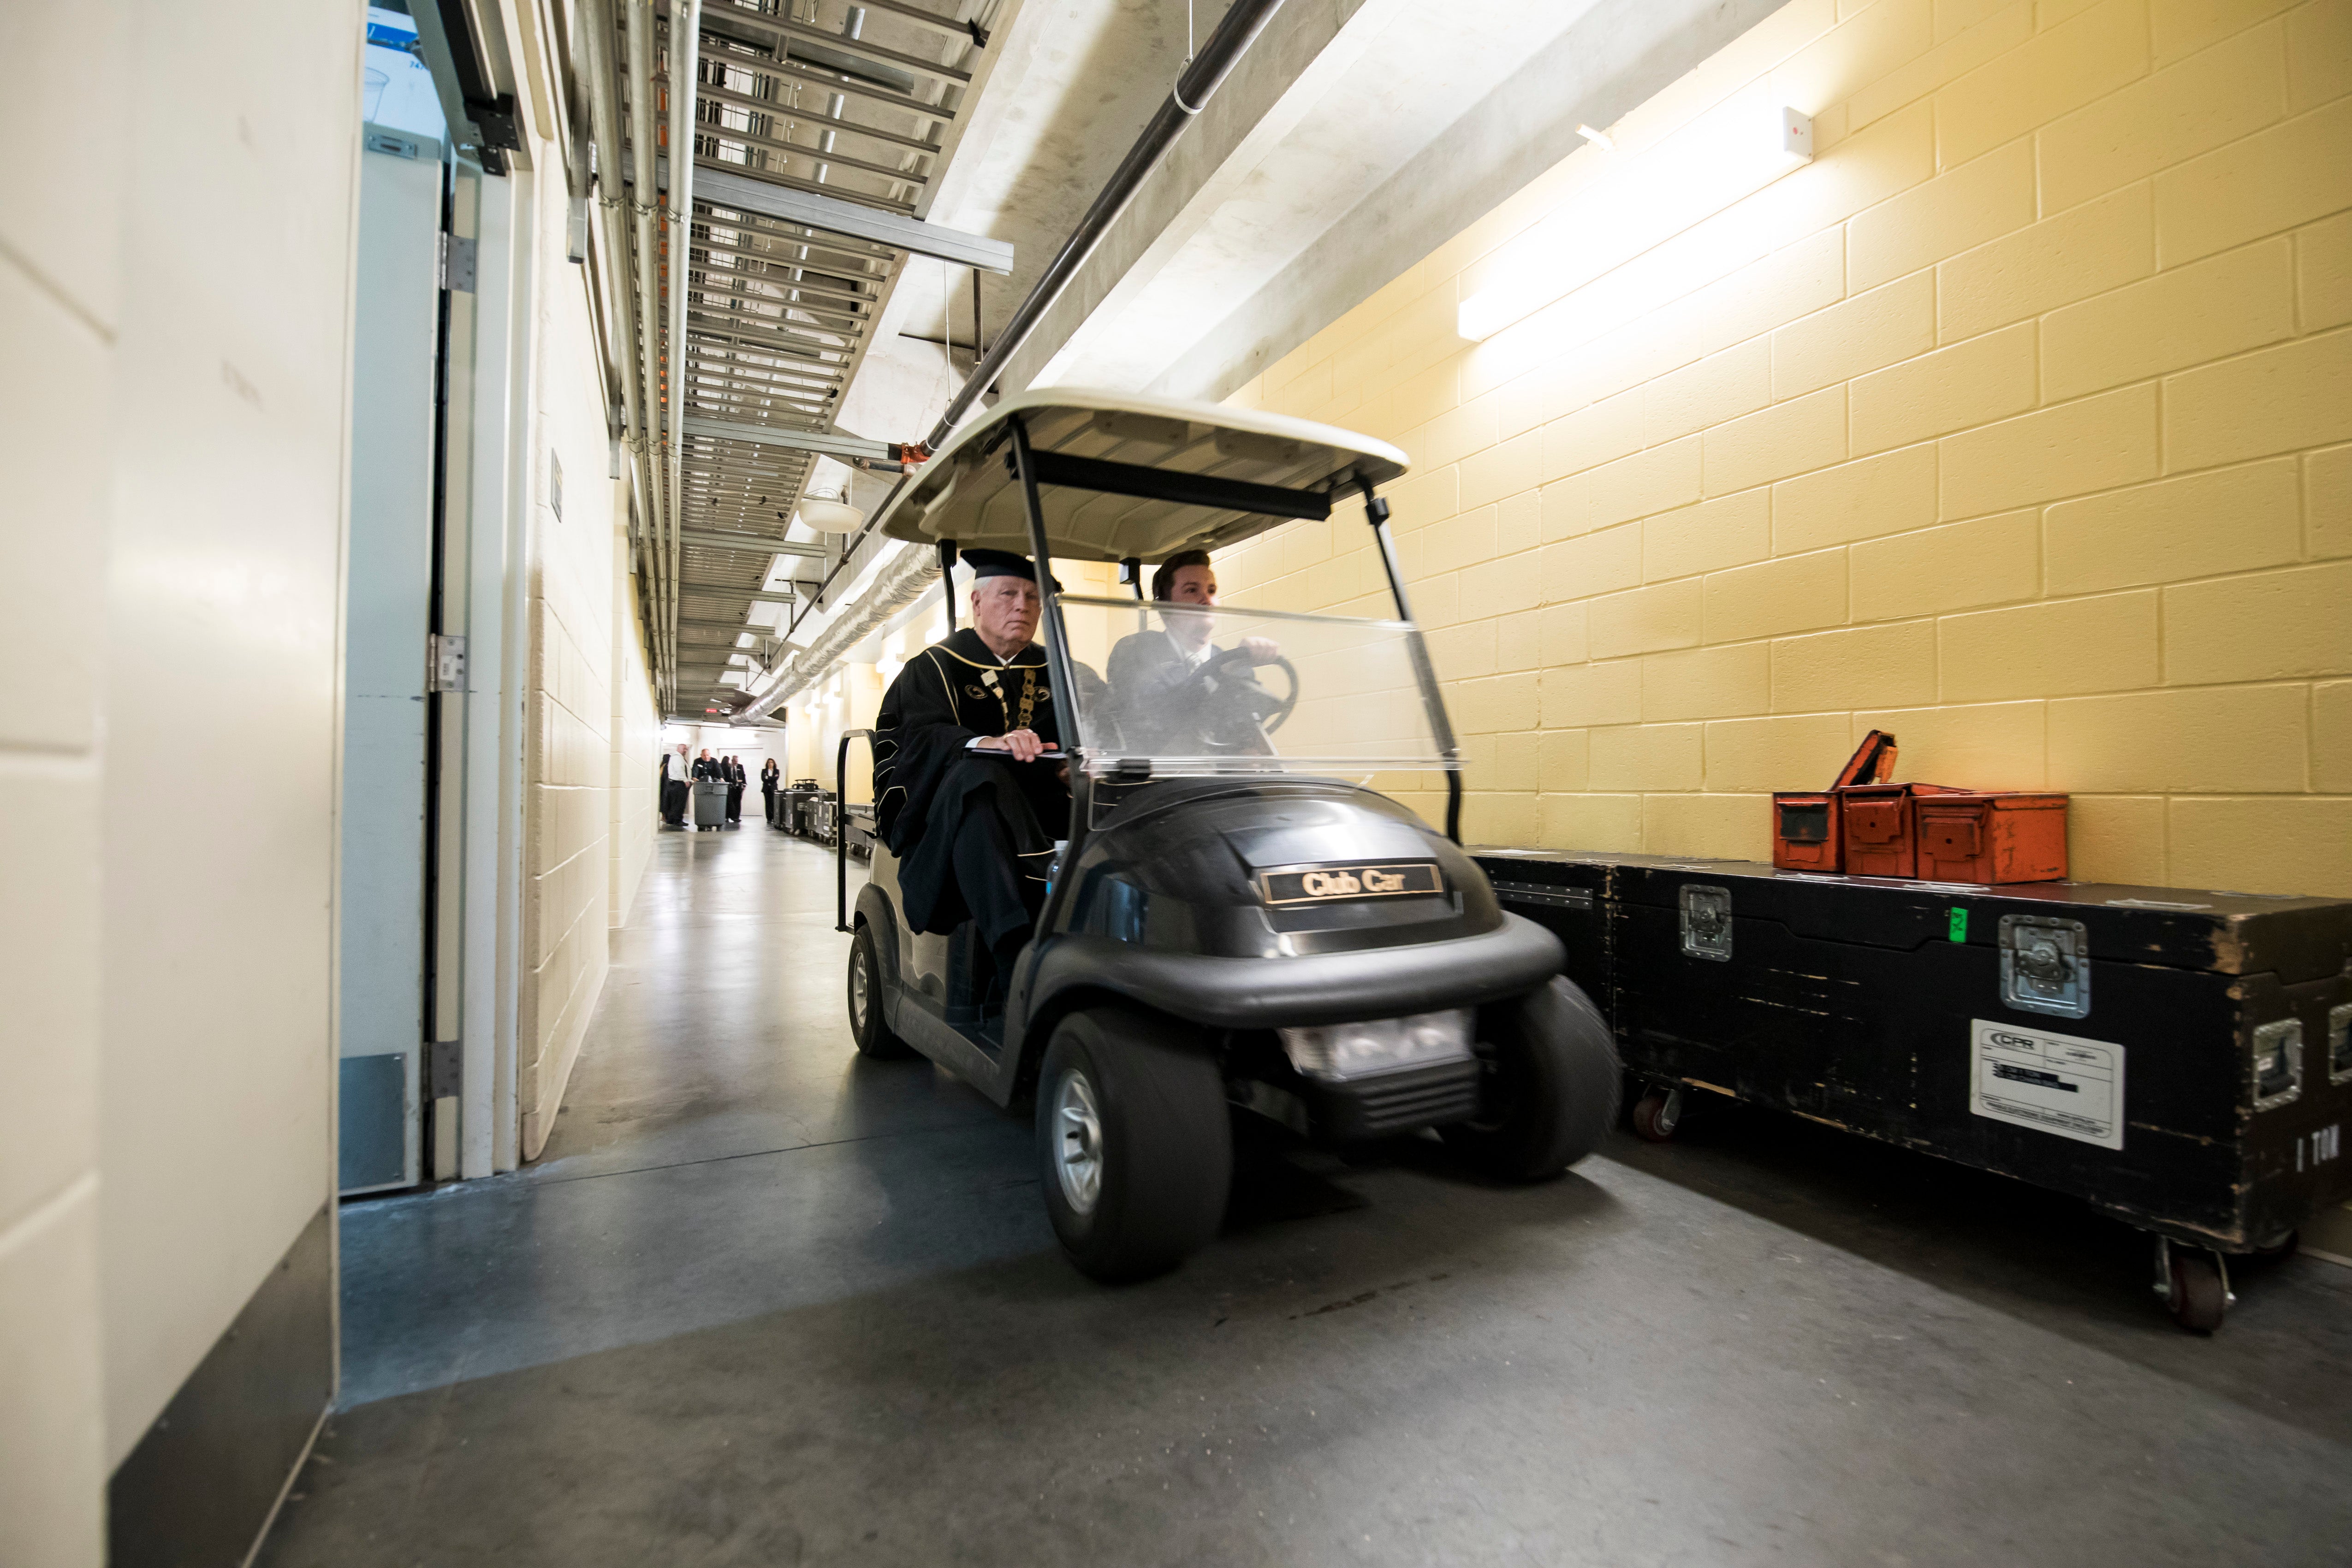 A man drives a golf cart through a hallway in CFE Arena as John C. Hitt wears a cap and gown and sits in the passenger seat .